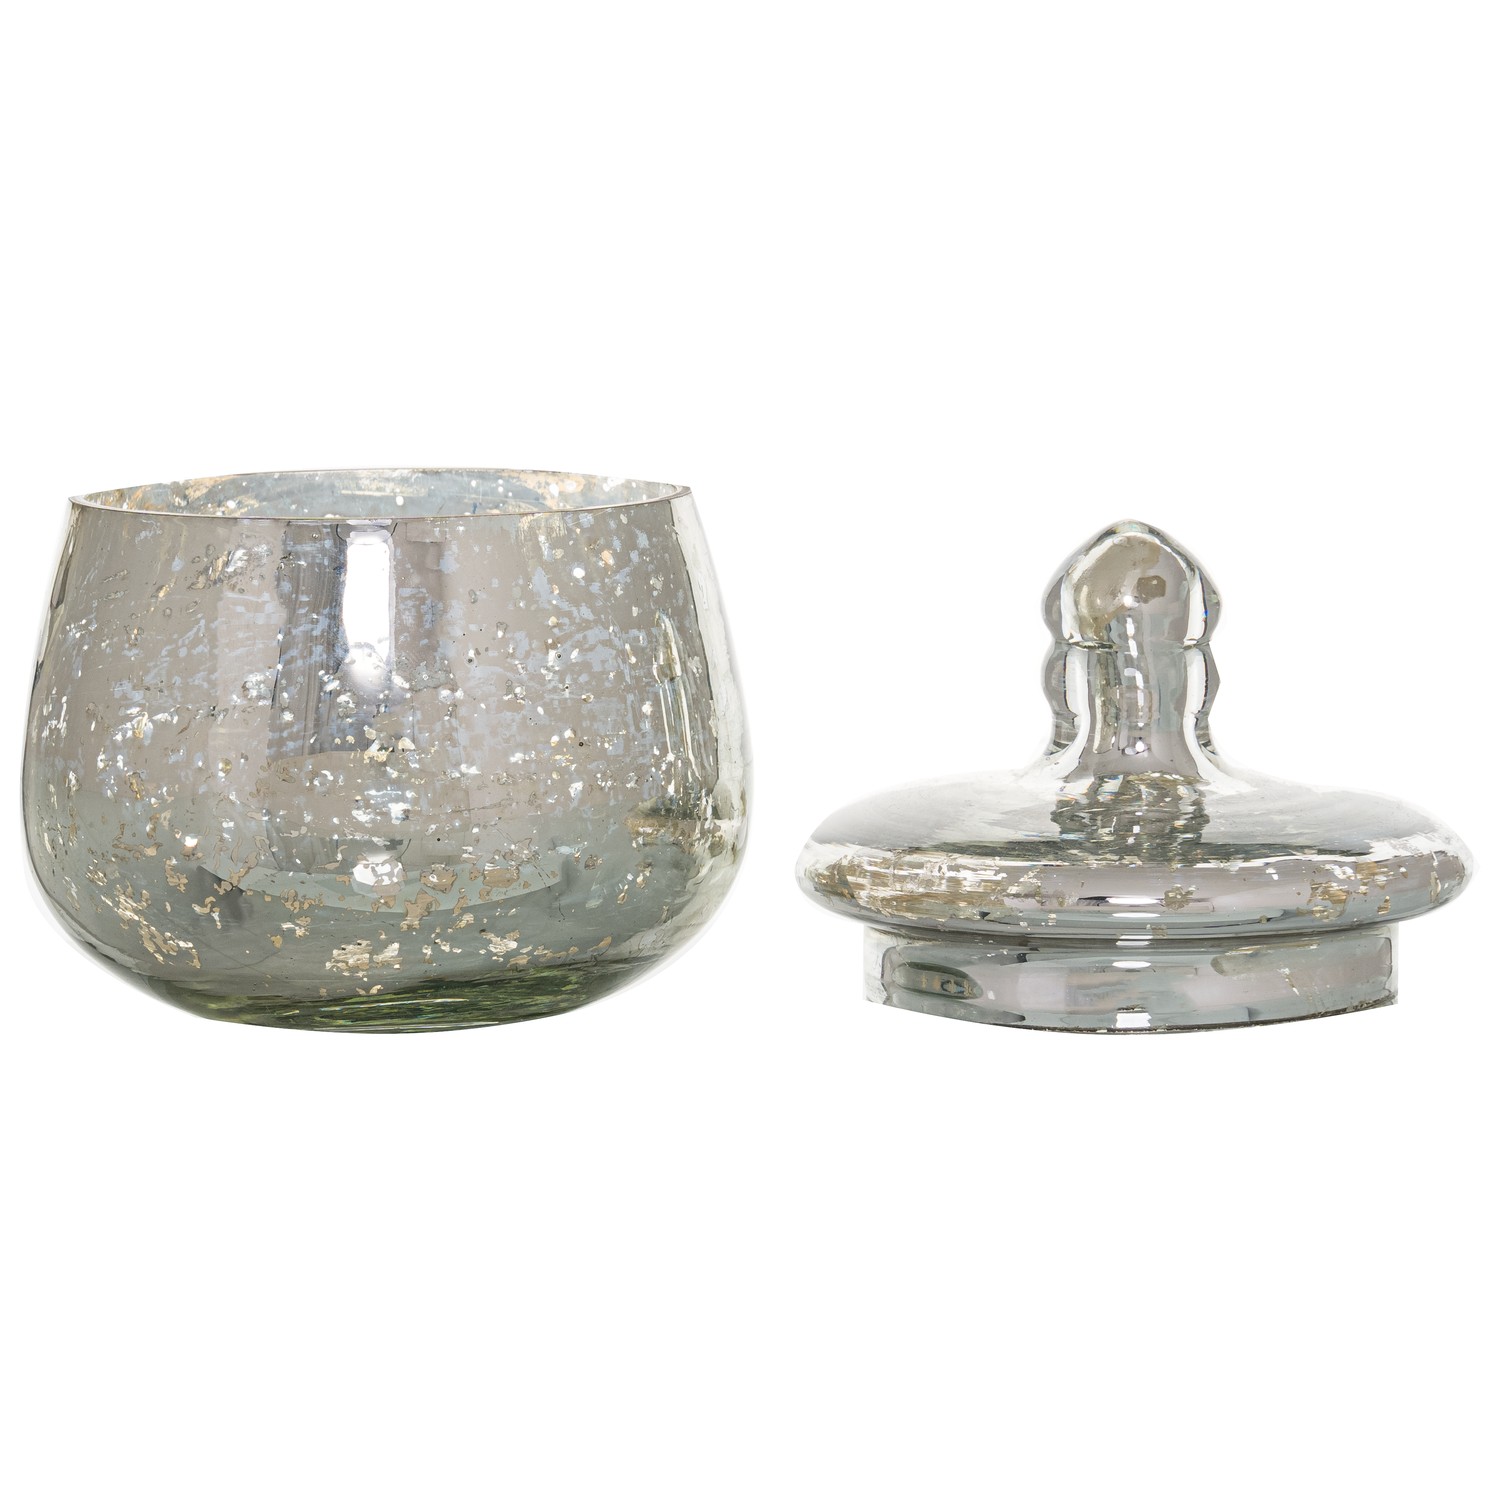 The Noel Collection Small Silver Bulbous Trinket Jar - Image 2